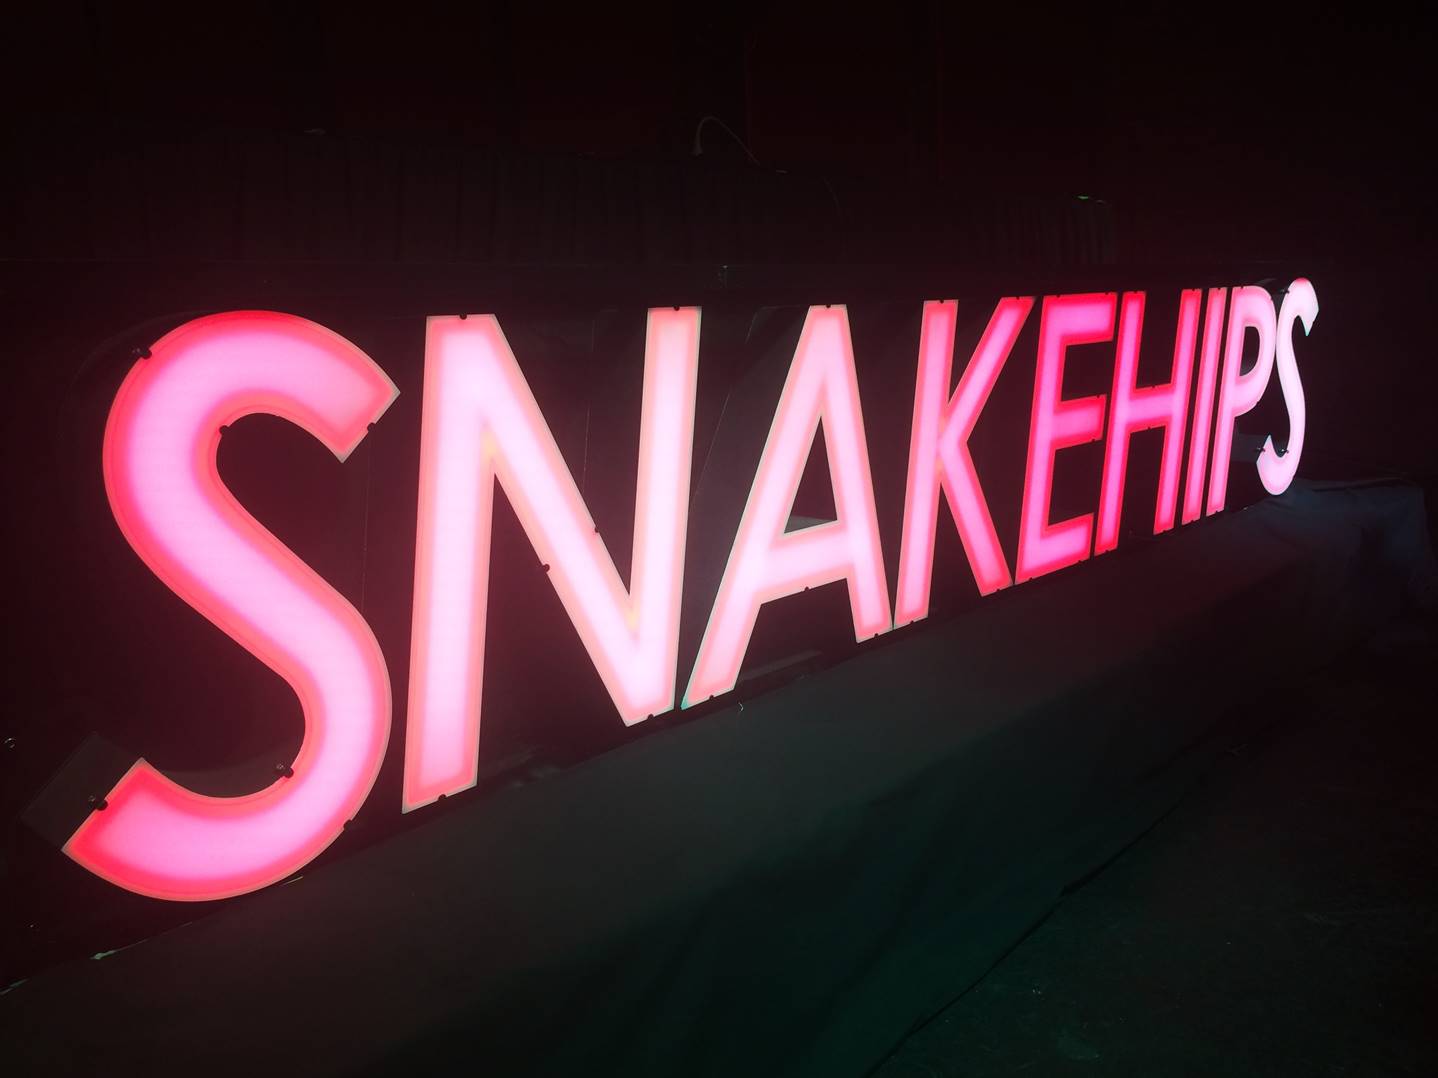 Snakehips LED sign of the future